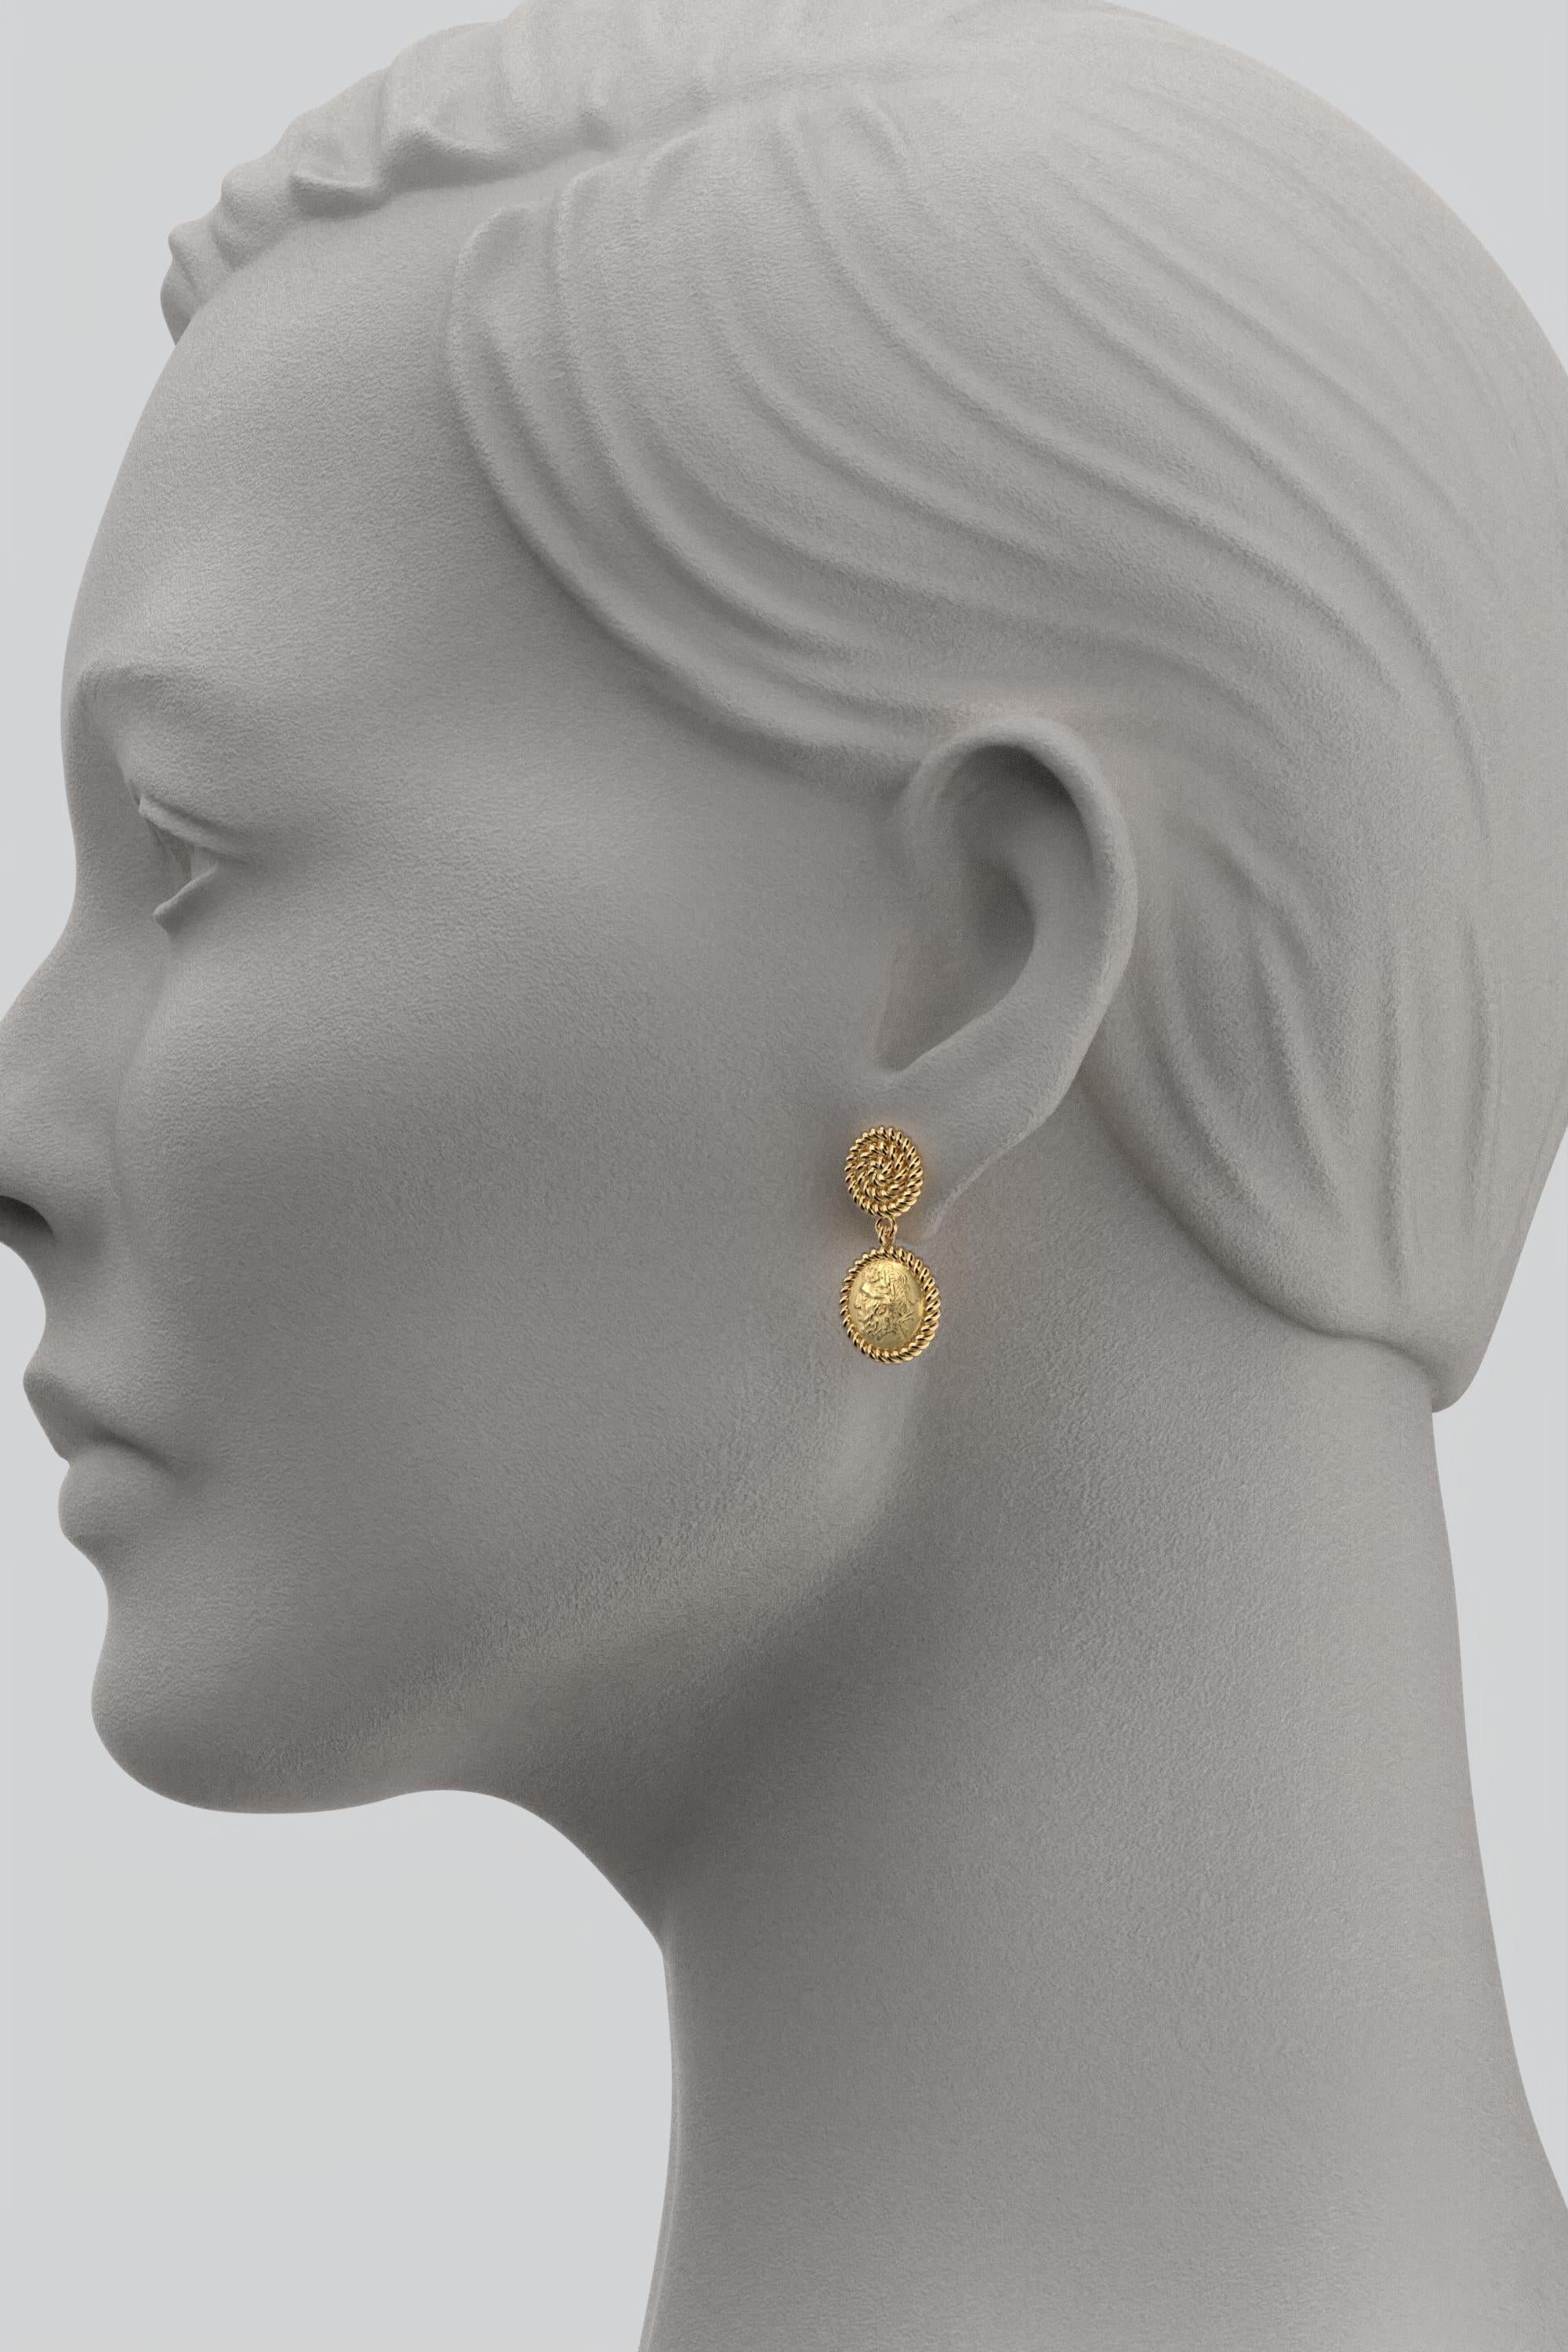 Dangle Earrings in 18k solid Gold, Ancient Greek Style, Zeus Coin Earrings In New Condition For Sale In Camisano Vicentino, VI